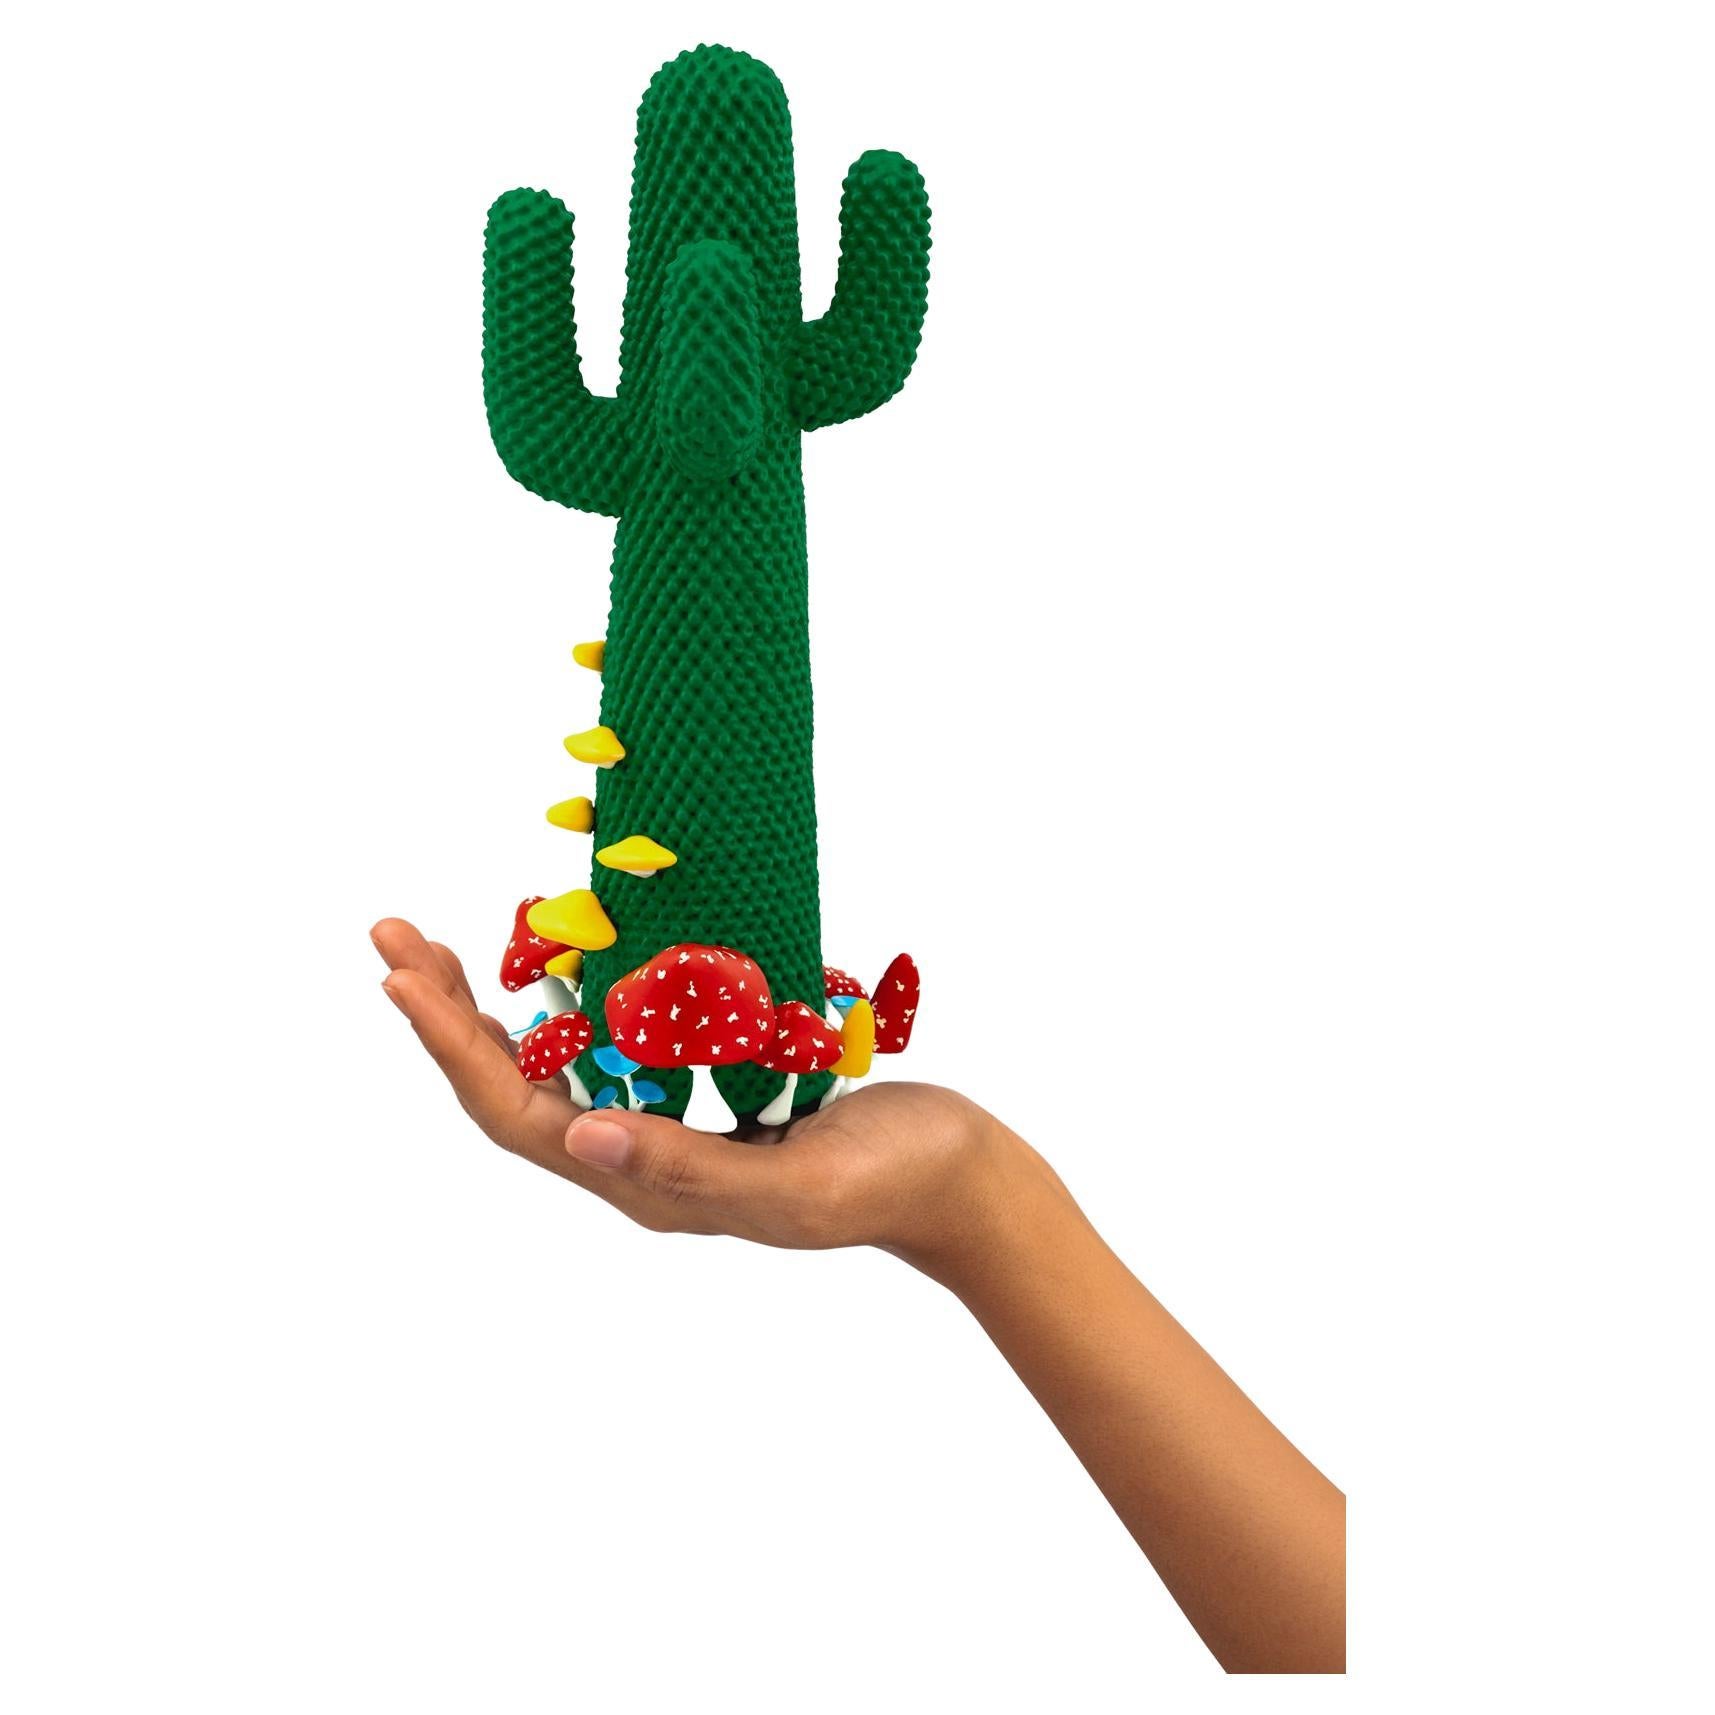 Limited Edition #54/99

Gufram presents the miniaturised version of the Shroom CACTUS® created in collaboration with A$AP Rocky and the artist’s new design studio HOMMEMADE Exactly as the real-size Shroom CACTUS®, the new Guframini piece features